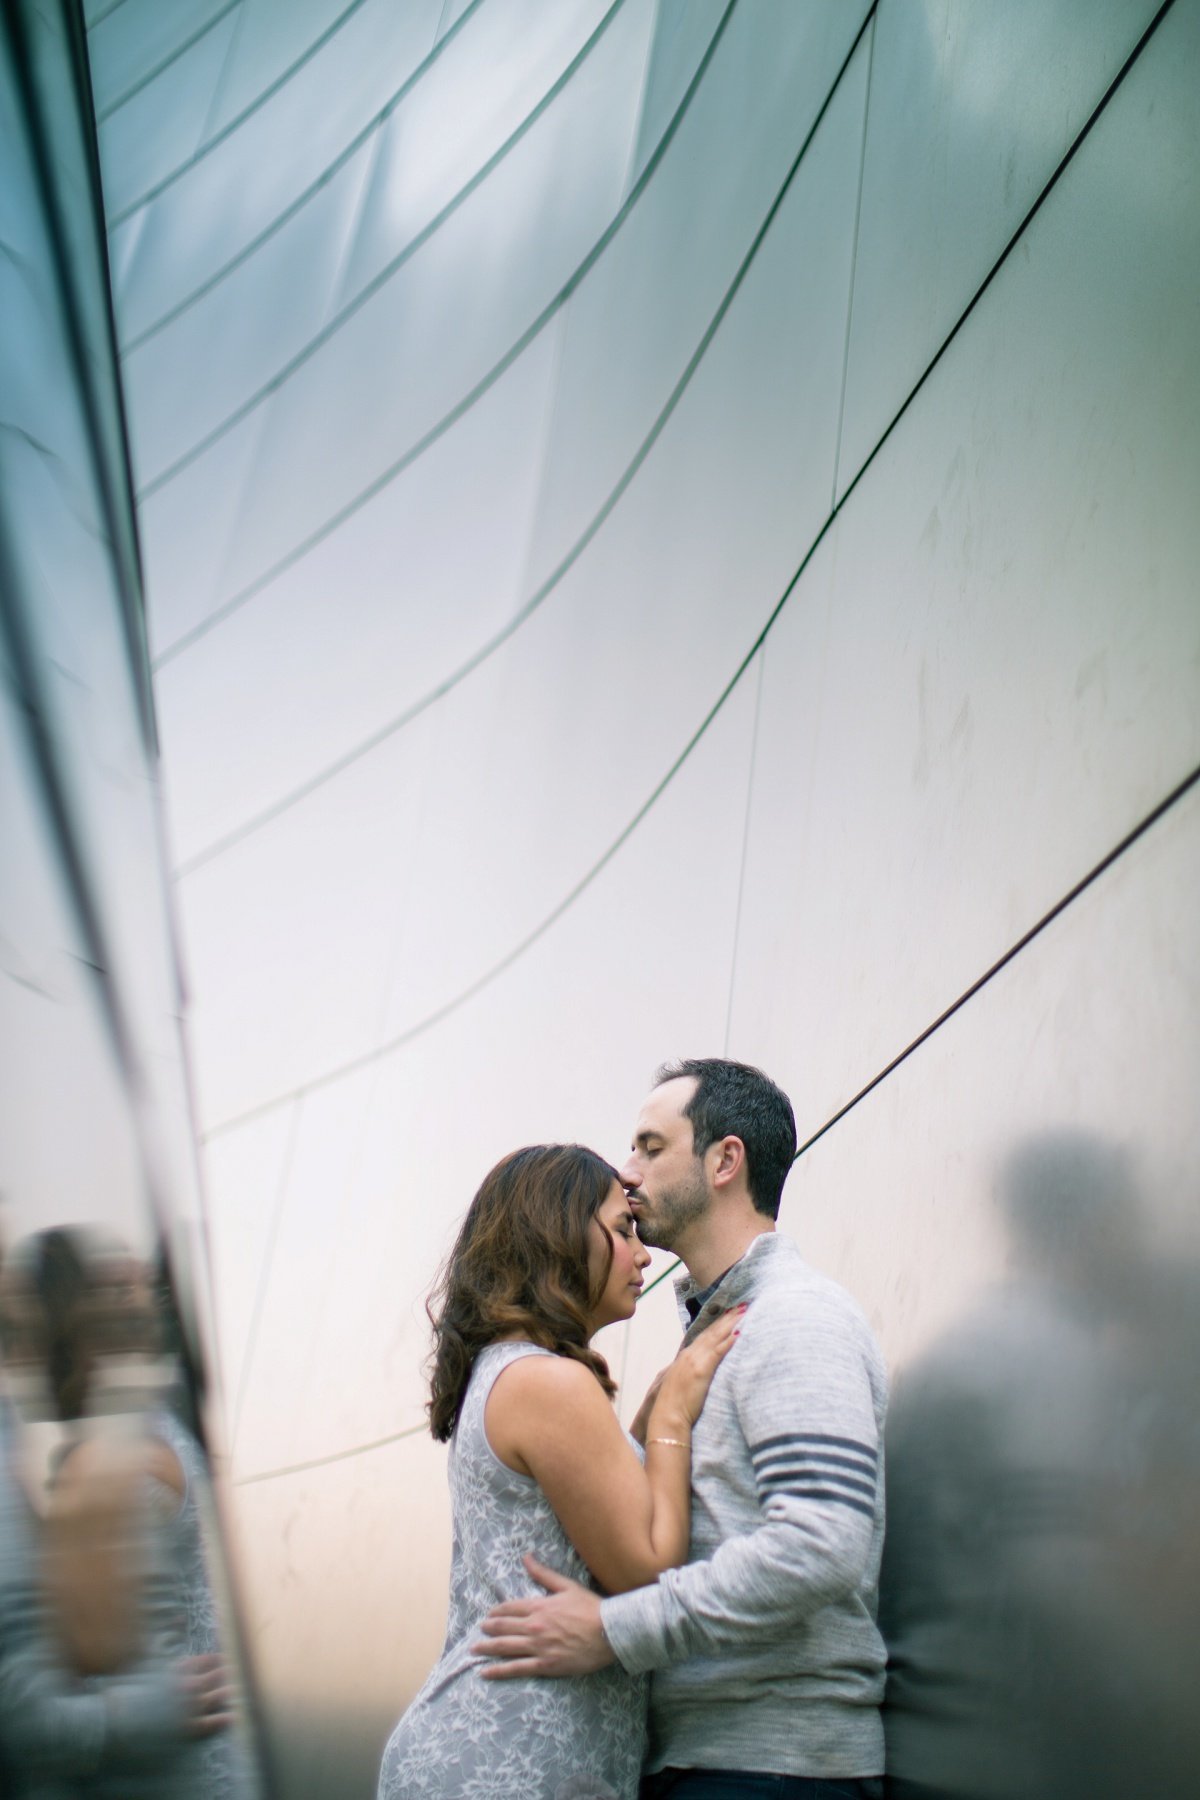 Groom to be kisses his Bride's forehead as they cozy up to each other during an engagement photo session at Walt Disney Concert Hall in Los Angeles